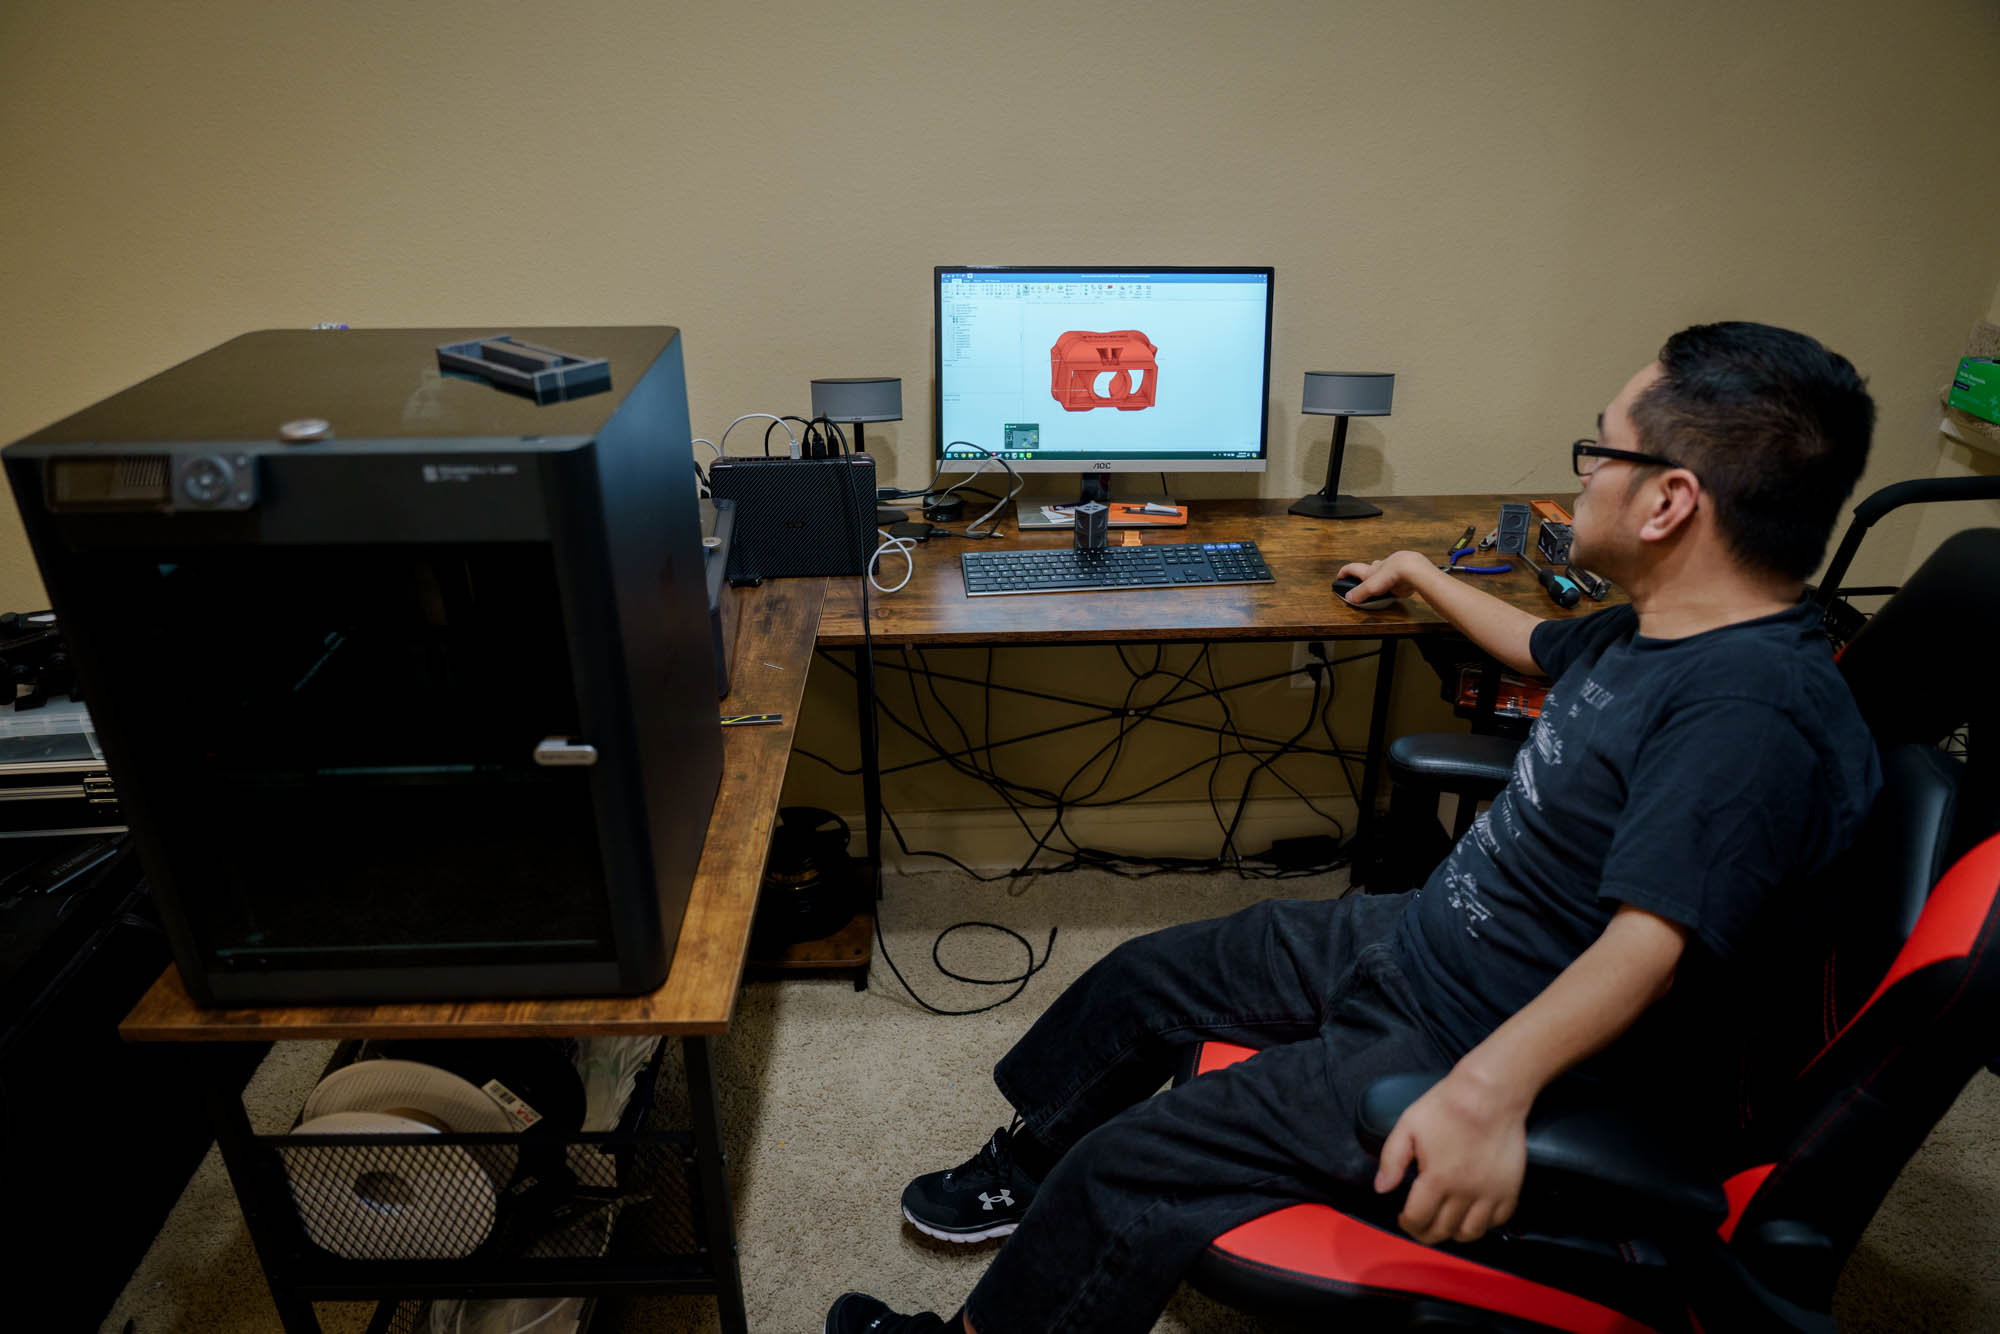 A musican sitting at a desk with a 3D printer and computer